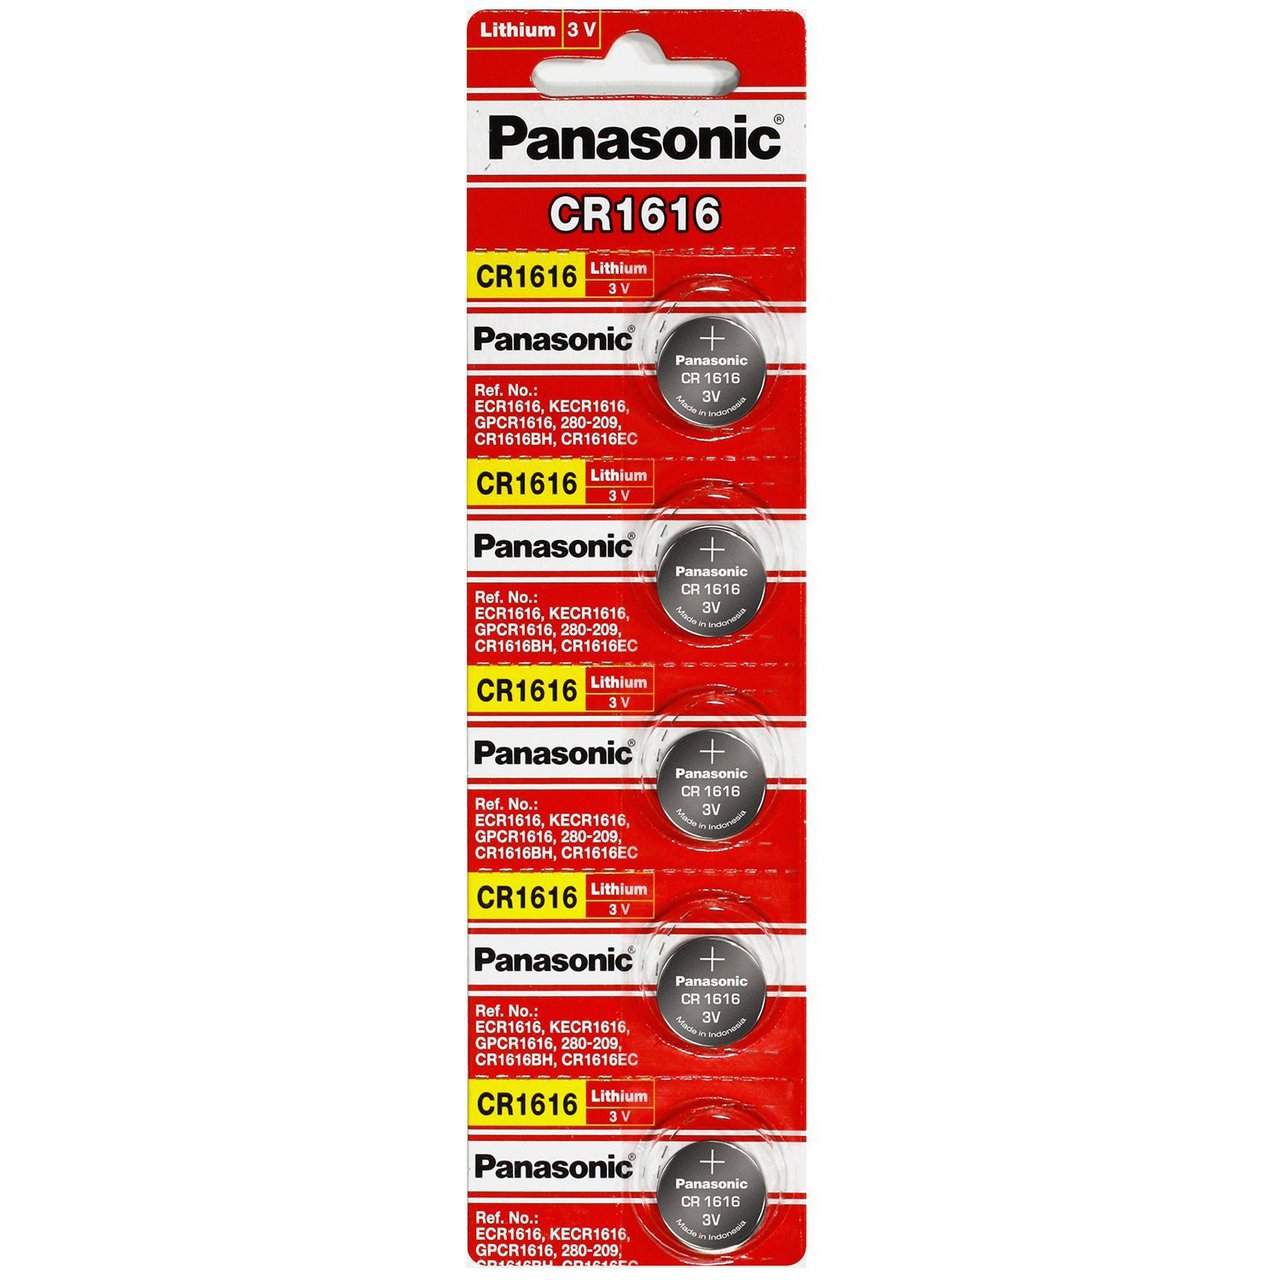 Panasonic CR1616 3V Lithium Coin Battery - 5 Pack + FREE SHIPPING!